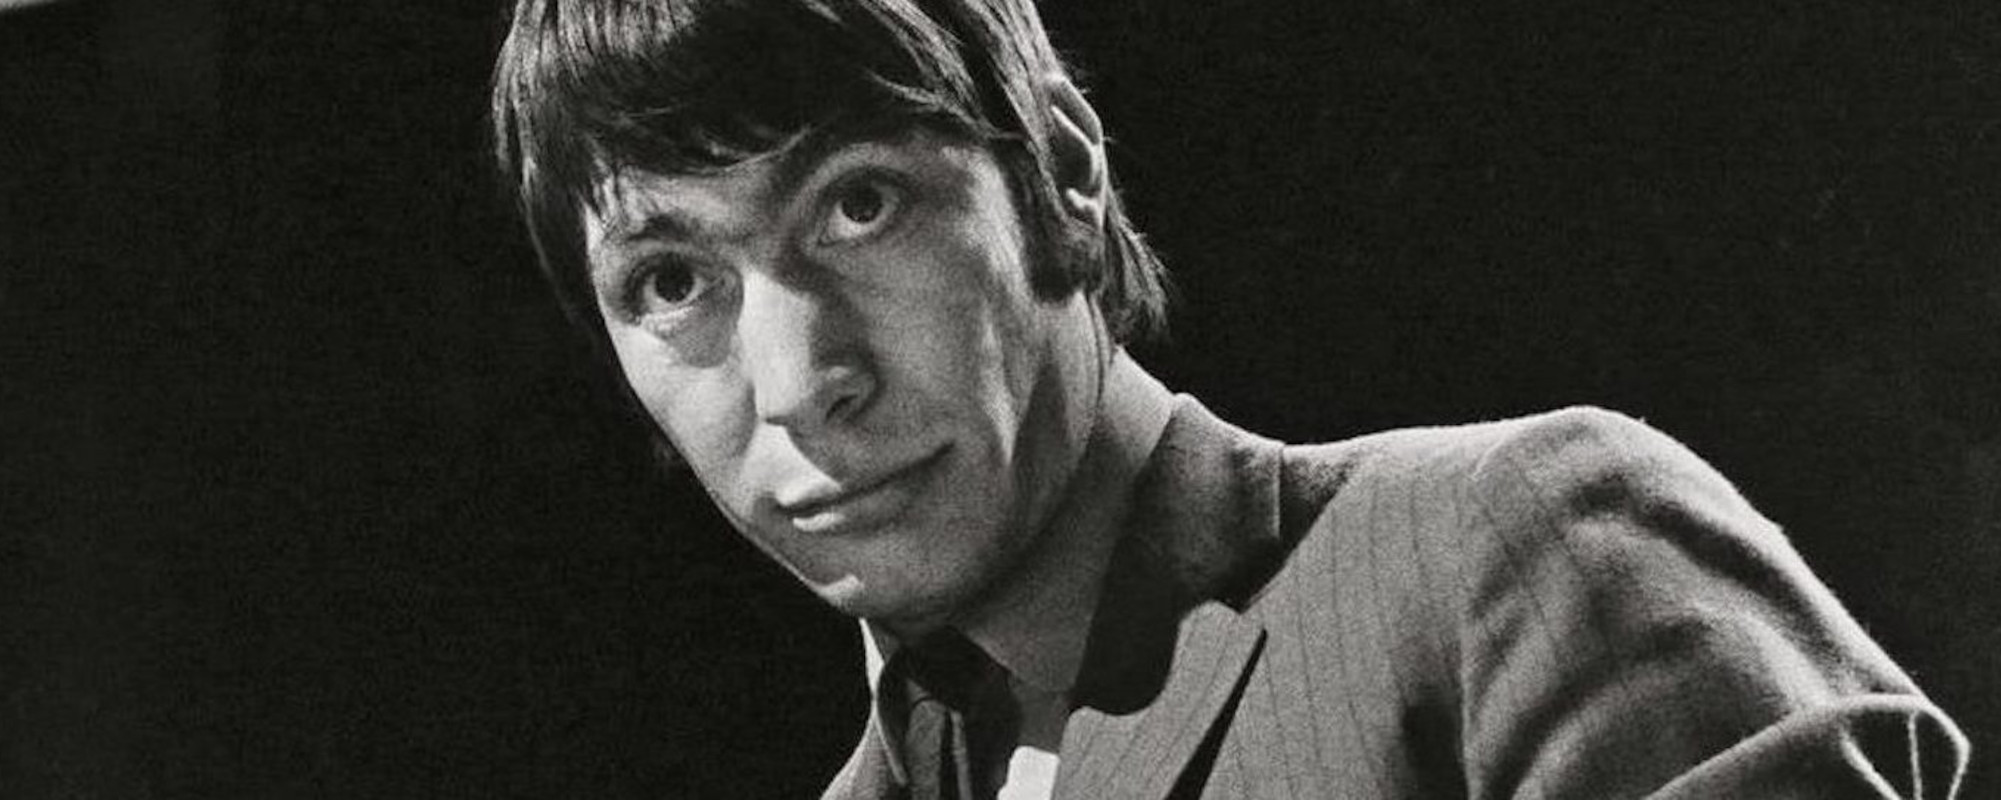 The Rolling Stones Post Tribute Video For Charlie Watts